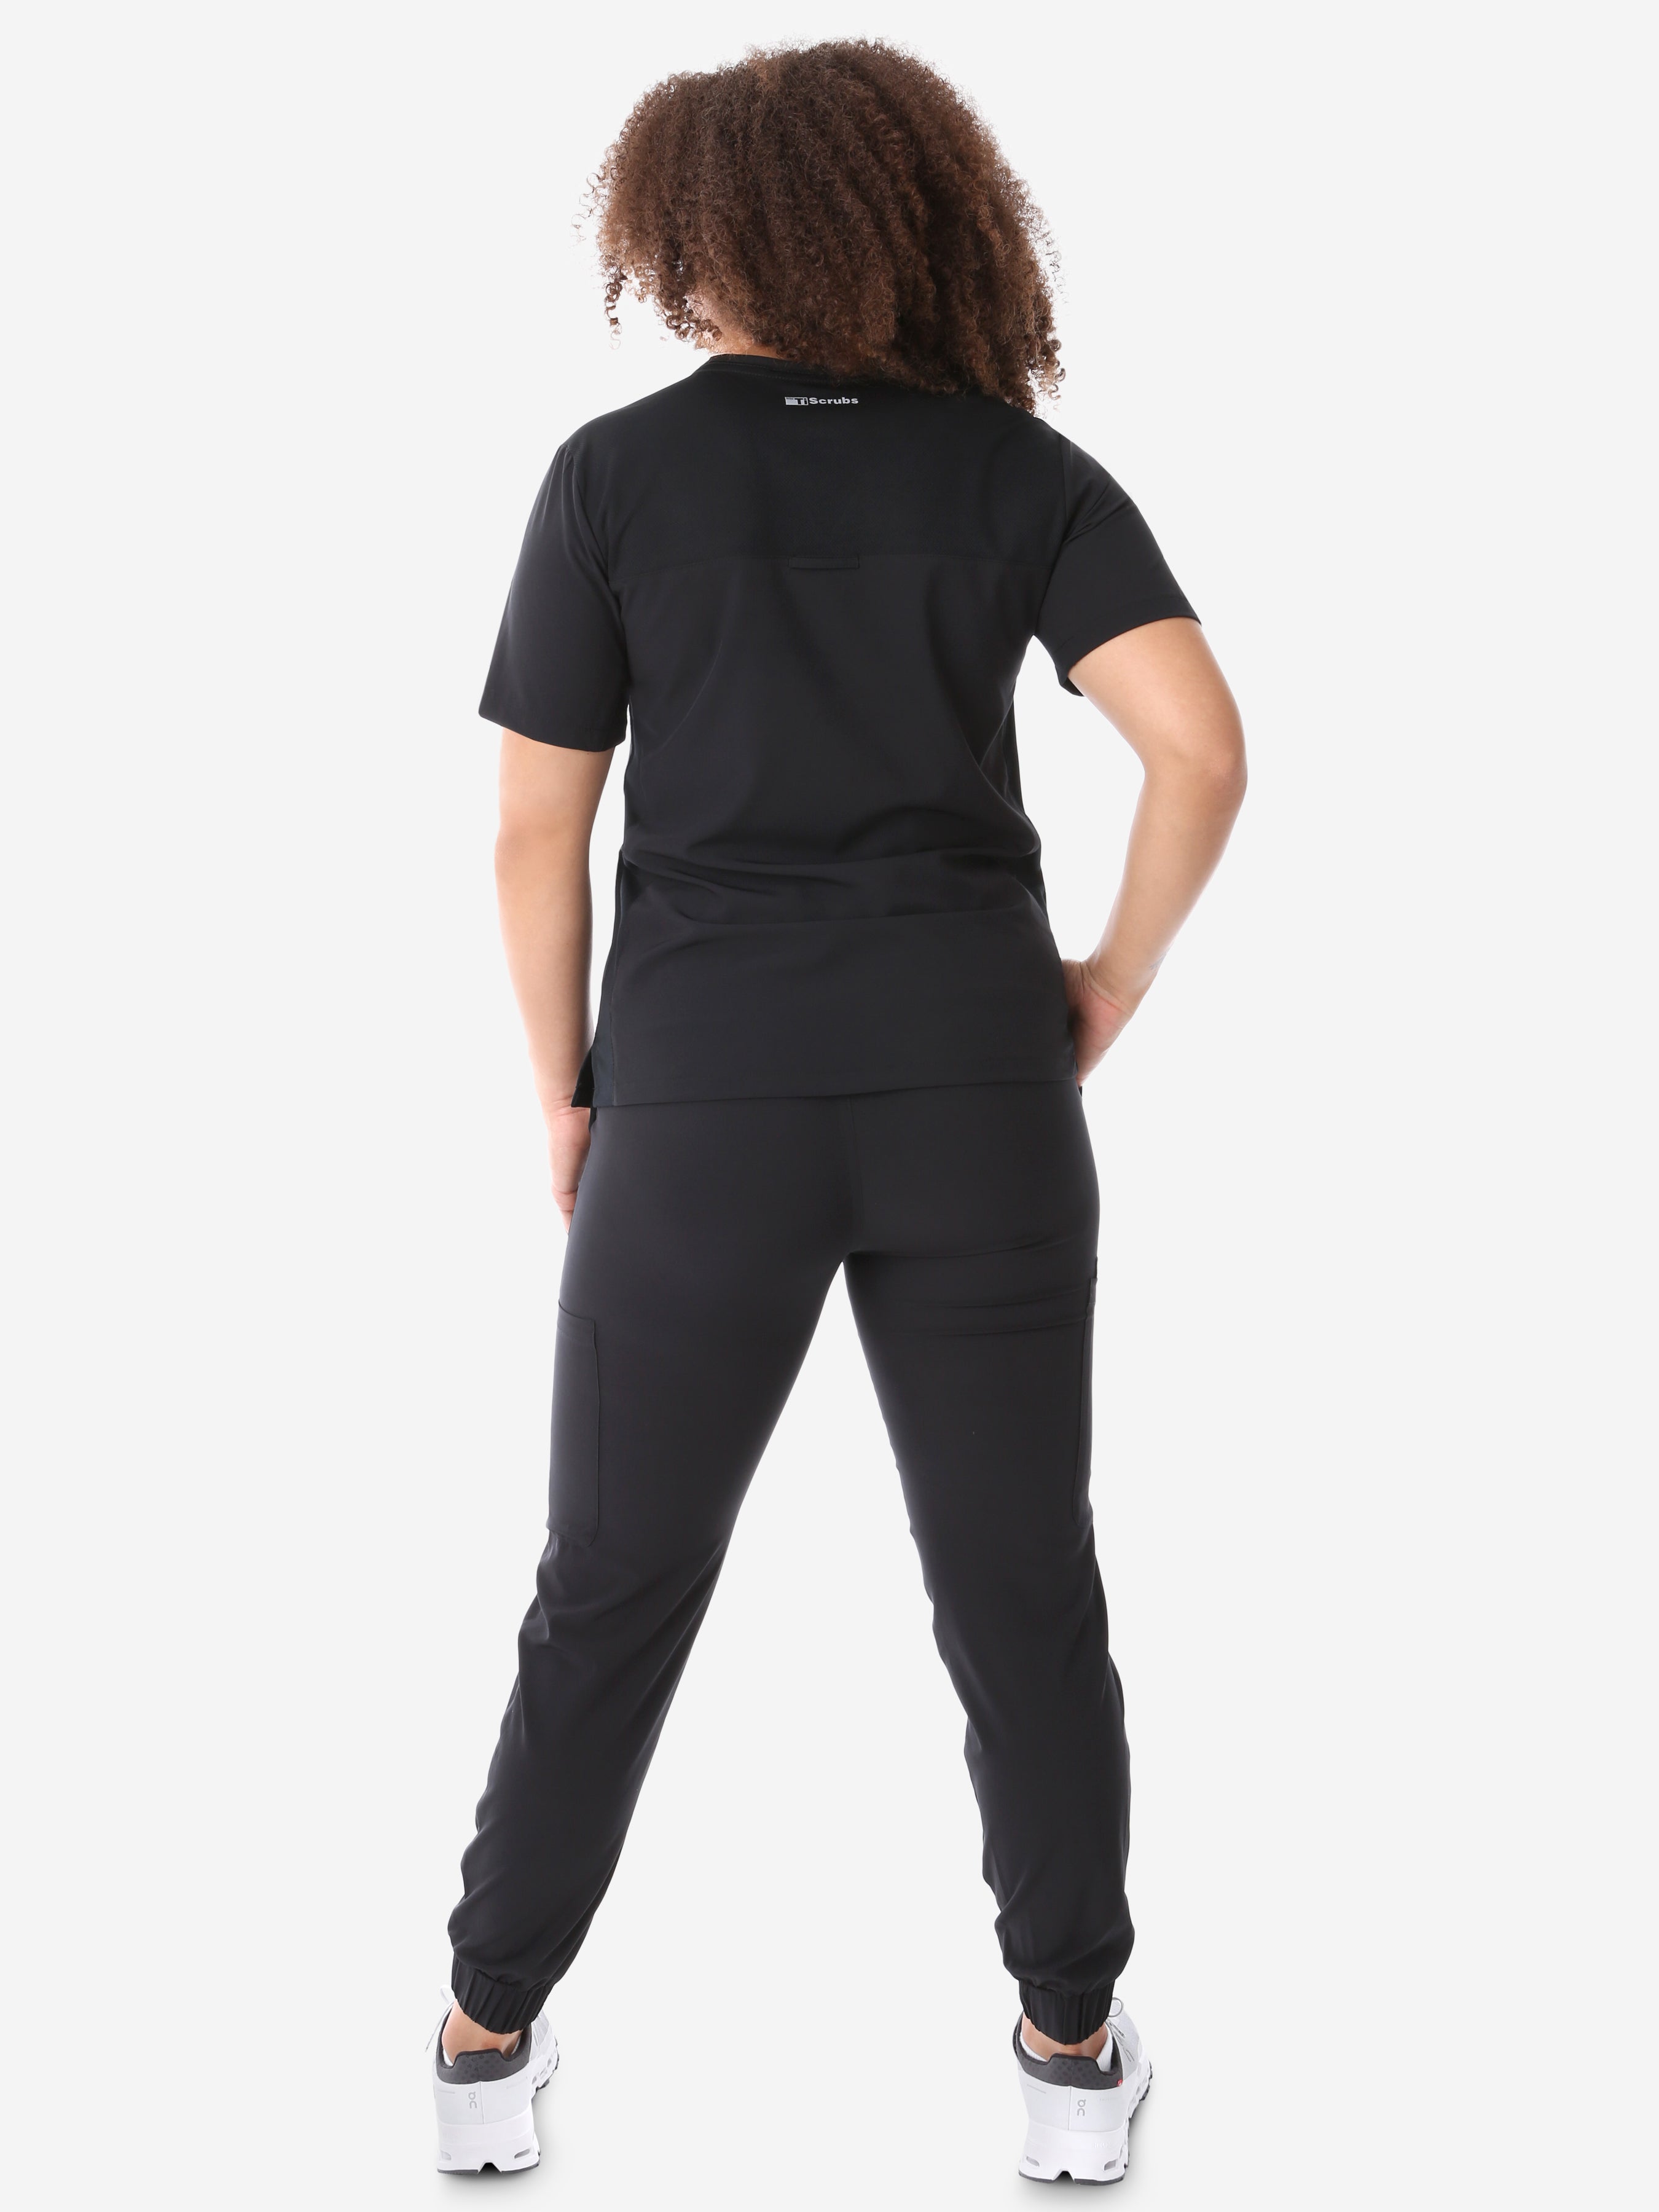 Women's Four-Pocket Scrub Top Real Black Top Full Body Back View with Joggers